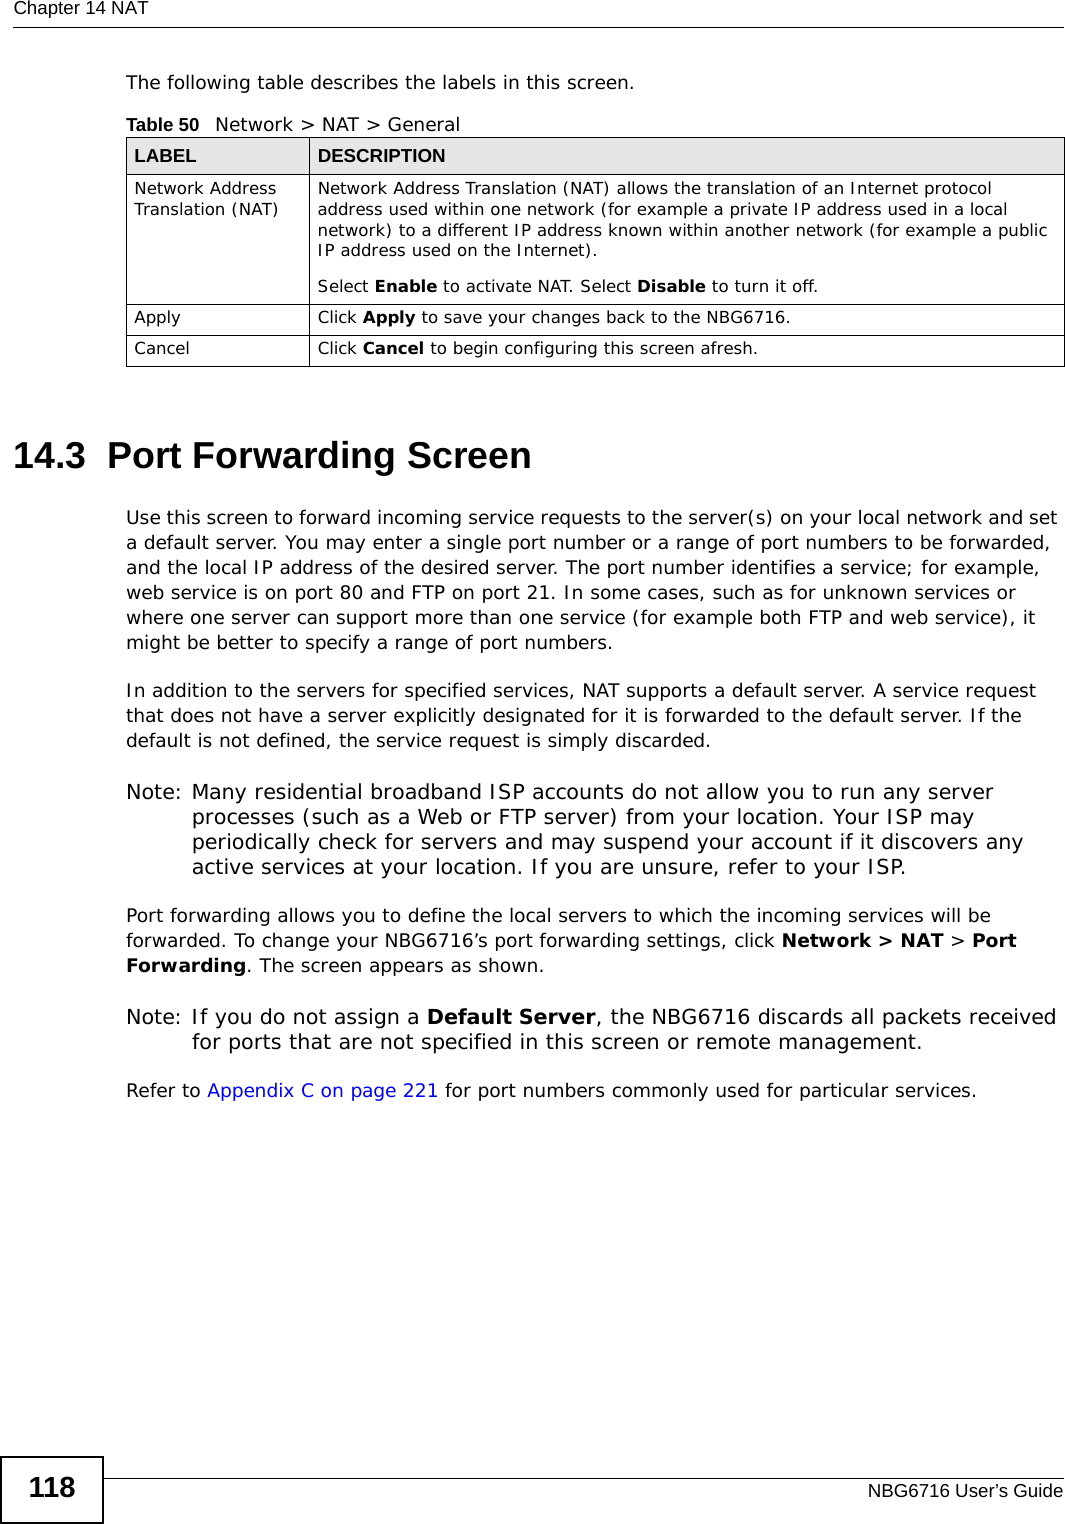 Chapter 14 NATNBG6716 User’s Guide118The following table describes the labels in this screen.14.3  Port Forwarding Screen   Use this screen to forward incoming service requests to the server(s) on your local network and set a default server. You may enter a single port number or a range of port numbers to be forwarded, and the local IP address of the desired server. The port number identifies a service; for example, web service is on port 80 and FTP on port 21. In some cases, such as for unknown services or where one server can support more than one service (for example both FTP and web service), it might be better to specify a range of port numbers.In addition to the servers for specified services, NAT supports a default server. A service request that does not have a server explicitly designated for it is forwarded to the default server. If the default is not defined, the service request is simply discarded.Note: Many residential broadband ISP accounts do not allow you to run any server processes (such as a Web or FTP server) from your location. Your ISP may periodically check for servers and may suspend your account if it discovers any active services at your location. If you are unsure, refer to your ISP.Port forwarding allows you to define the local servers to which the incoming services will be forwarded. To change your NBG6716’s port forwarding settings, click Network &gt; NAT &gt; Port Forwarding. The screen appears as shown.Note: If you do not assign a Default Server, the NBG6716 discards all packets received for ports that are not specified in this screen or remote management.Refer to Appendix C on page 221 for port numbers commonly used for particular services.Table 50   Network &gt; NAT &gt; GeneralLABEL DESCRIPTIONNetwork Address Translation (NAT) Network Address Translation (NAT) allows the translation of an Internet protocol address used within one network (for example a private IP address used in a local network) to a different IP address known within another network (for example a public IP address used on the Internet). Select Enable to activate NAT. Select Disable to turn it off.Apply Click Apply to save your changes back to the NBG6716.Cancel Click Cancel to begin configuring this screen afresh.